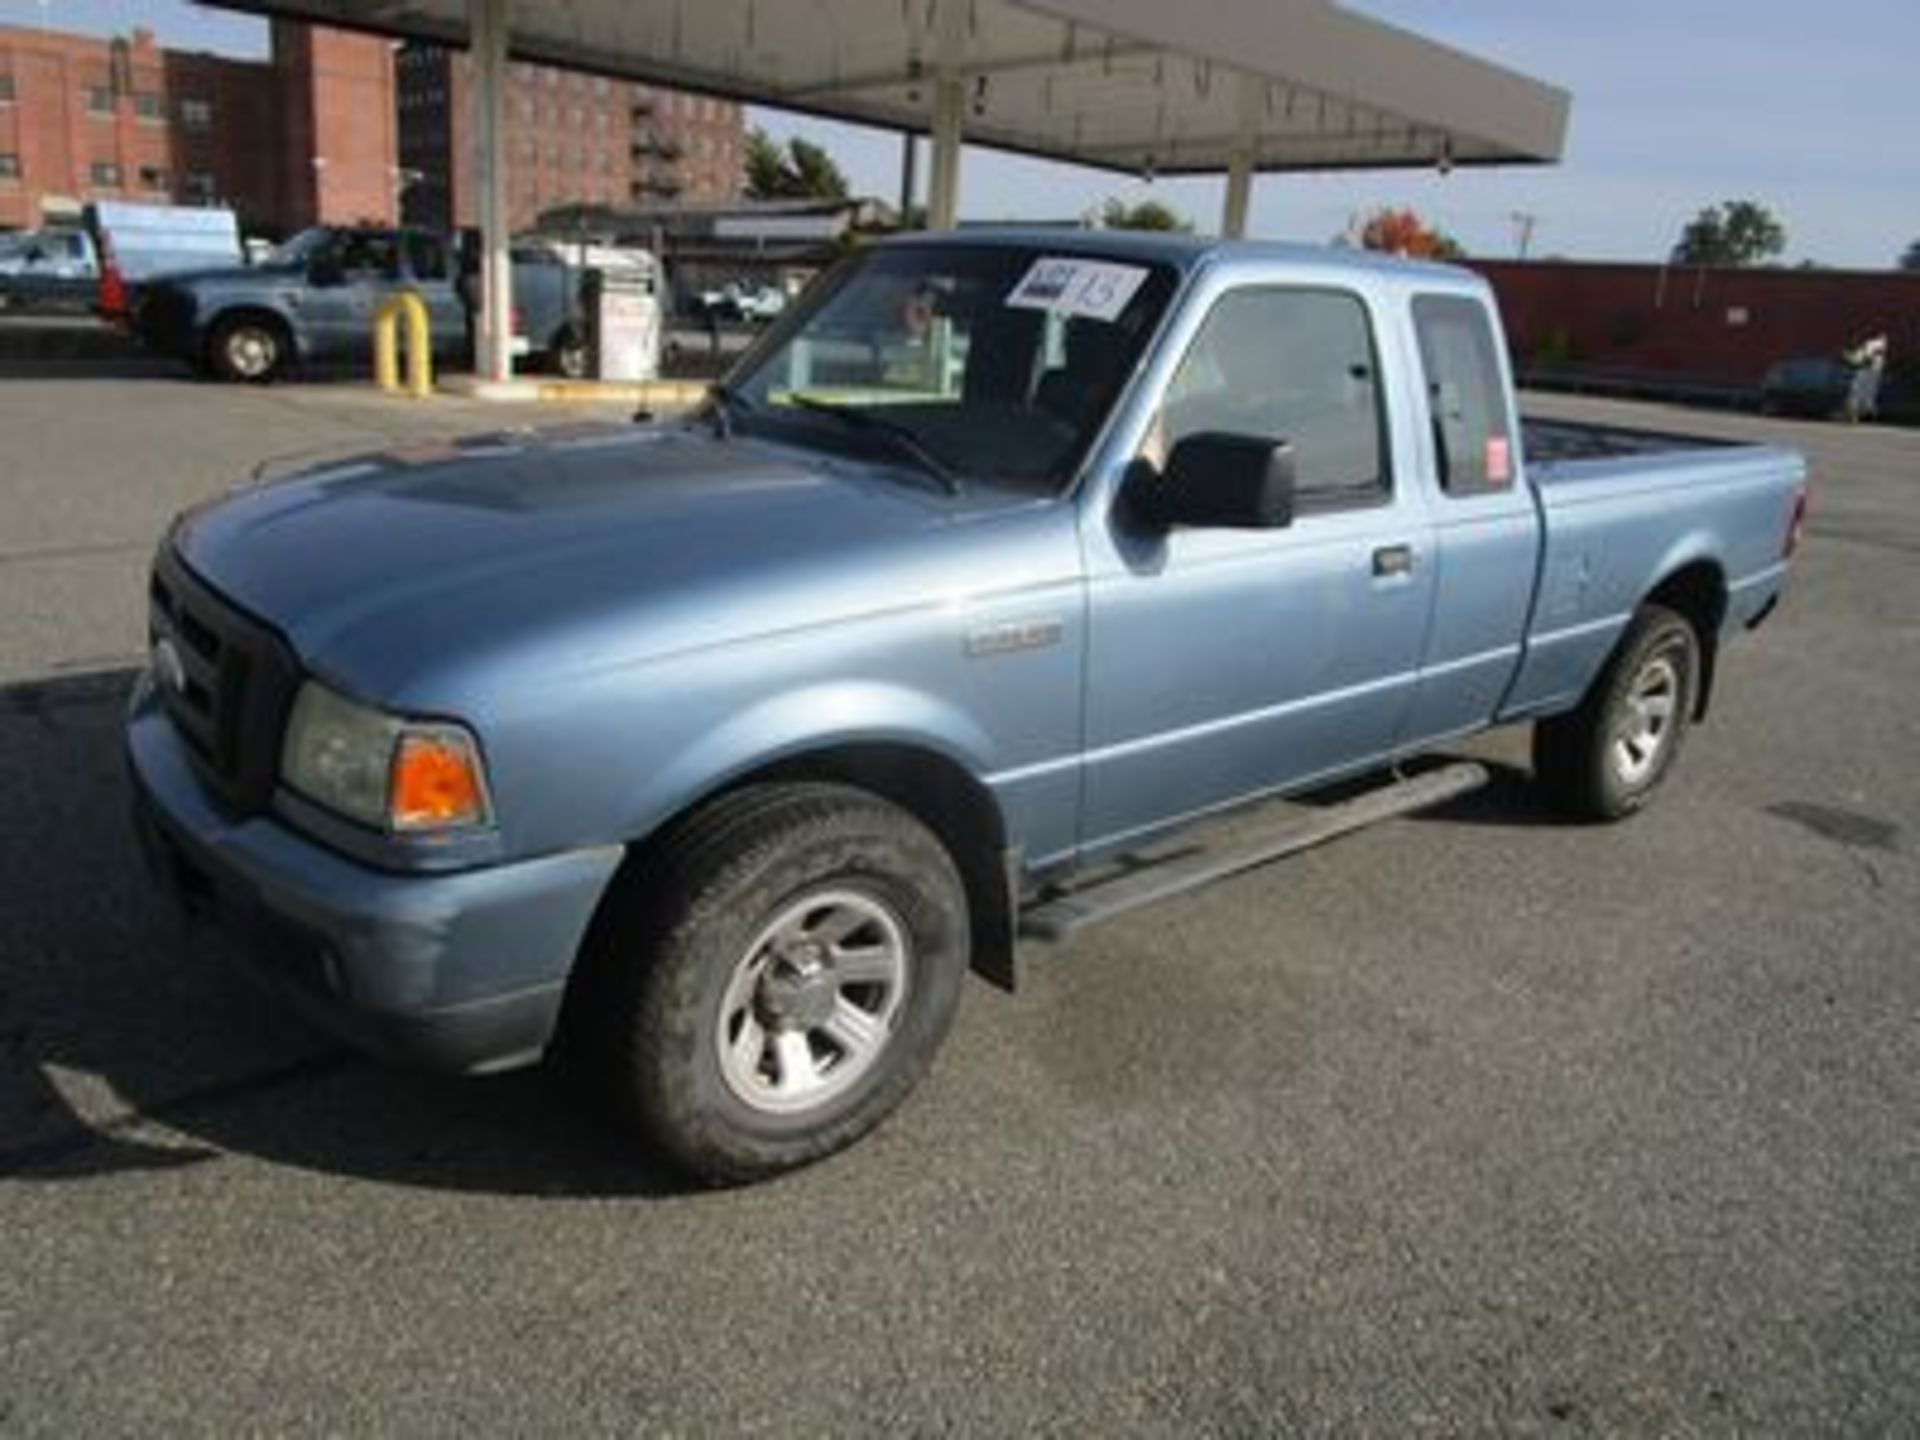 2007 FORD RANGER XLT PICKUP TRUCK, 4X4, EXTENDED CAB, AT, AC, VIN # 1FTZR45EX7PA61785 (126,337